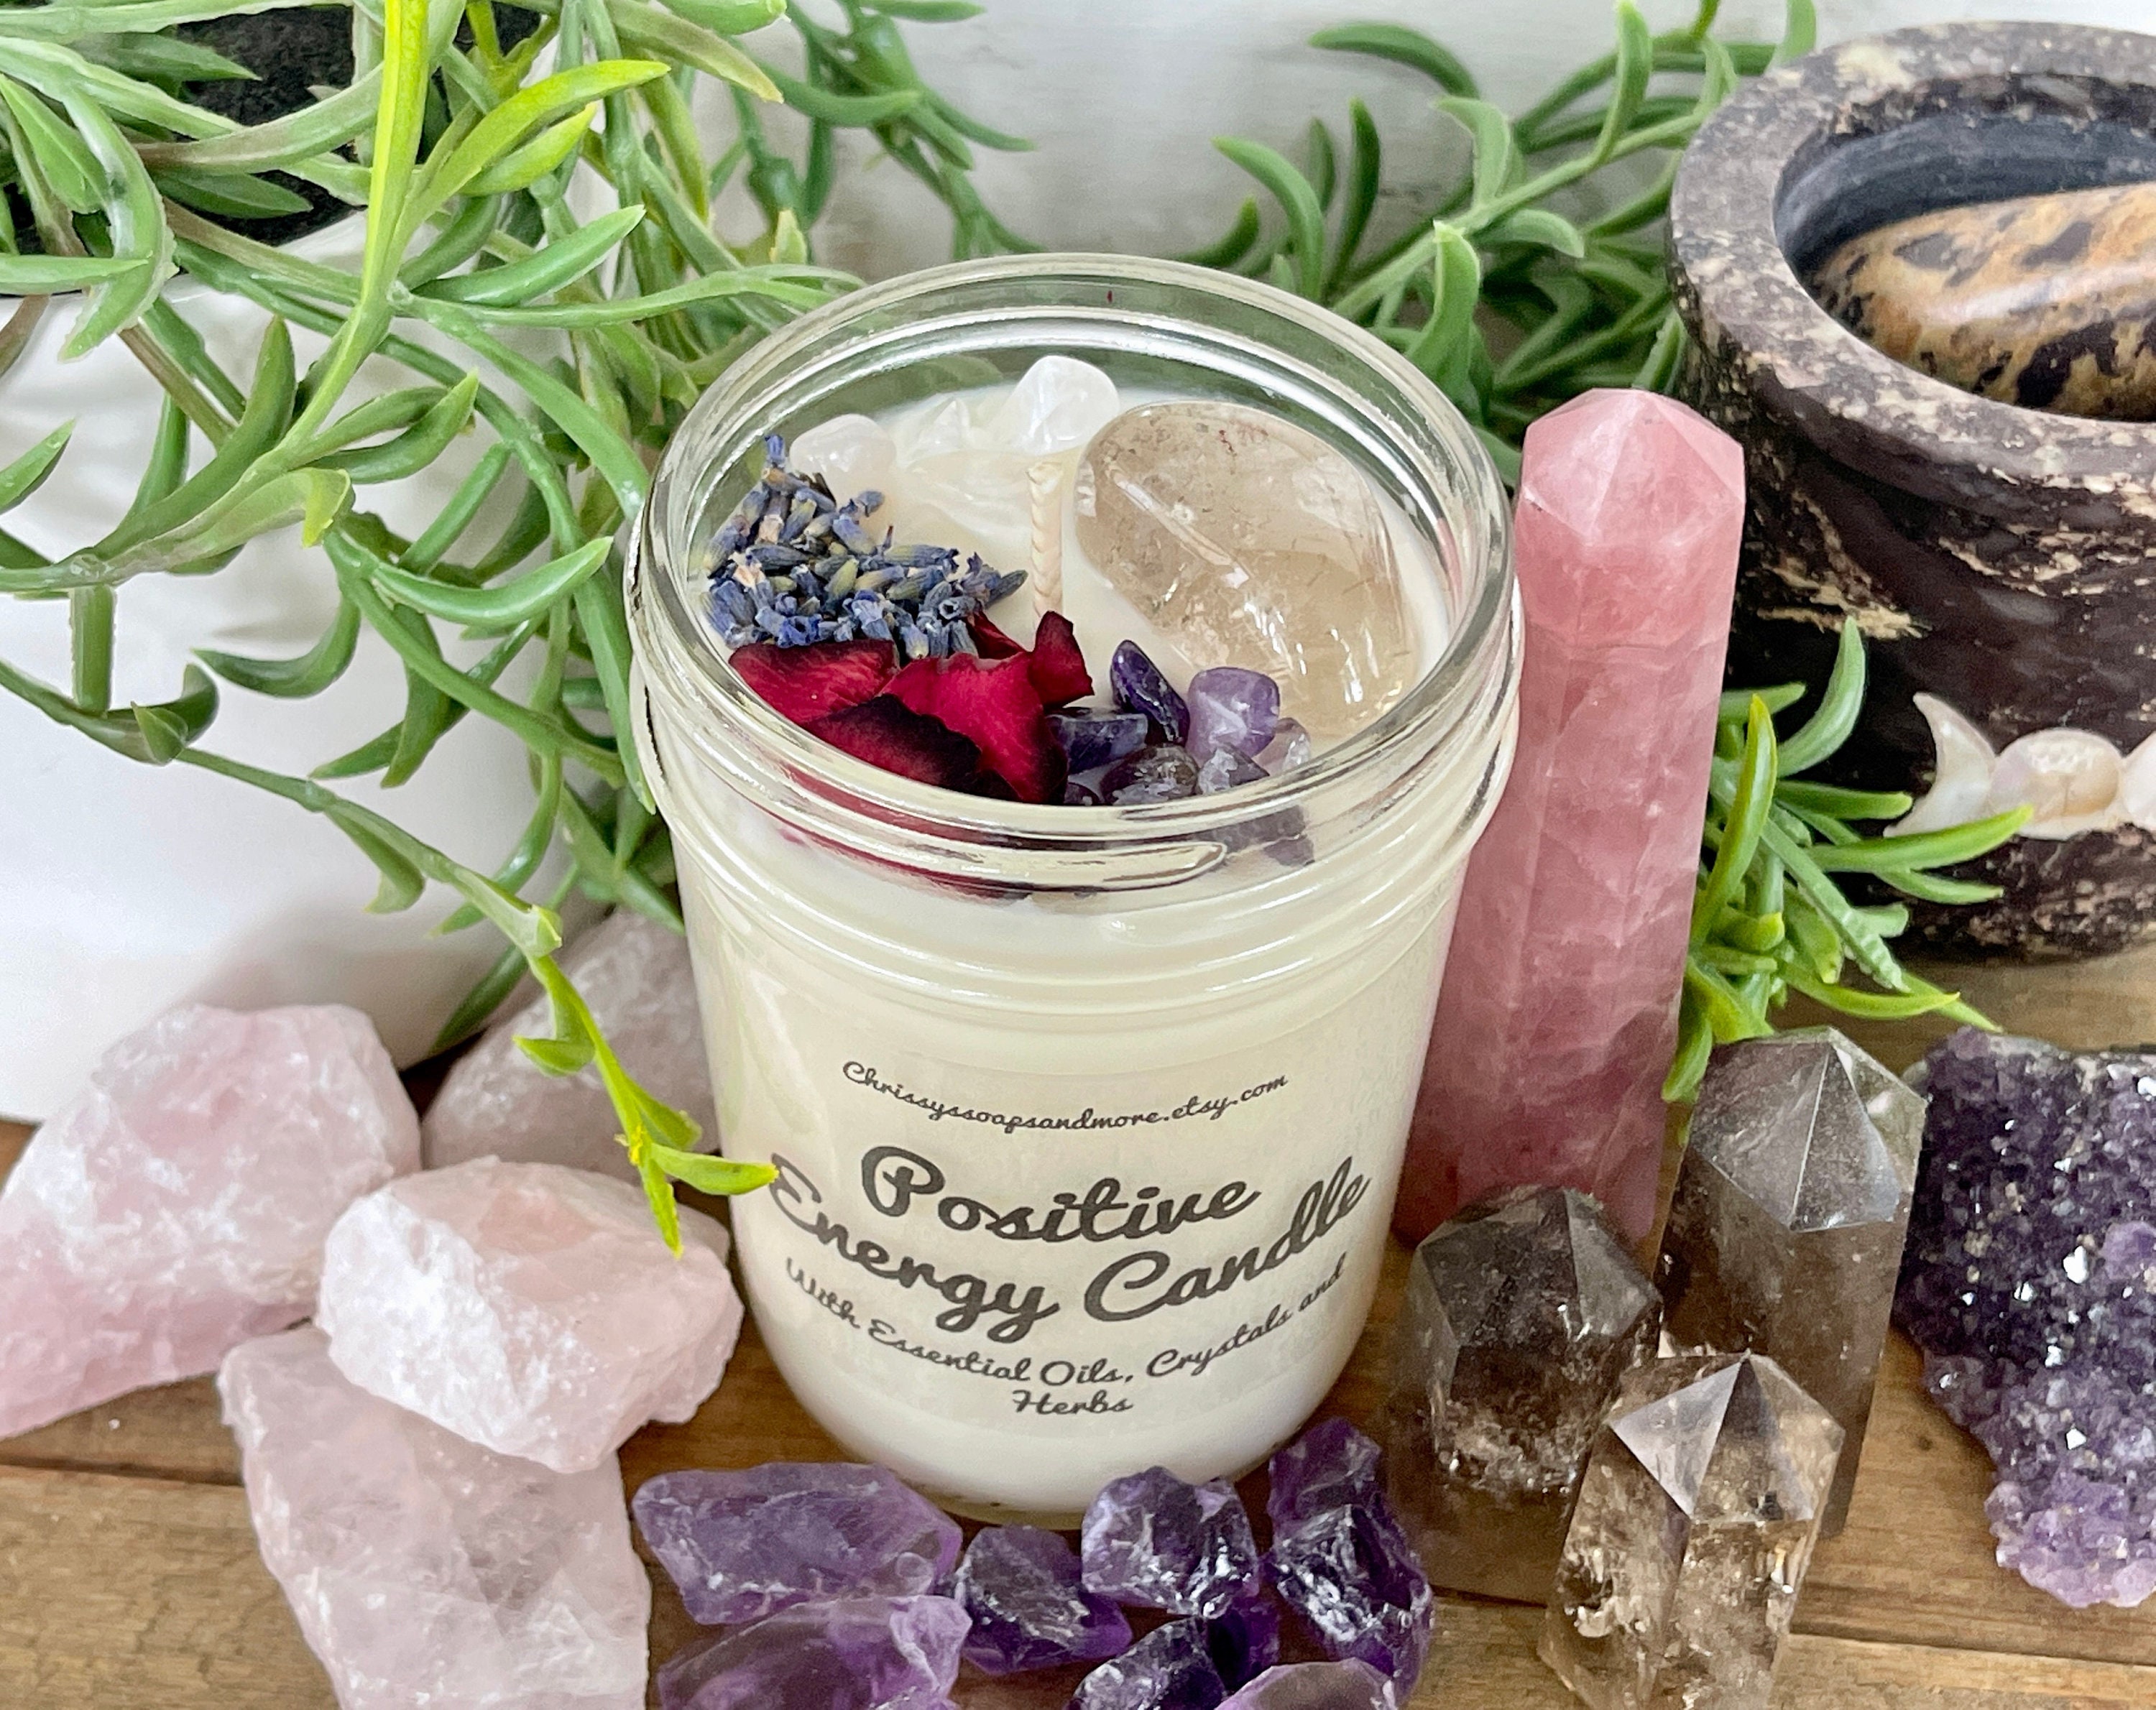  Healing Crystals Candle - 12 oz Soy Lavender Candles for Women.  Aromatherapy Candle with Real Crystals and Stones. Spiritual Gifts for  Women, Self Care Yoga Crystal Valentine's Day Gifts for Women 